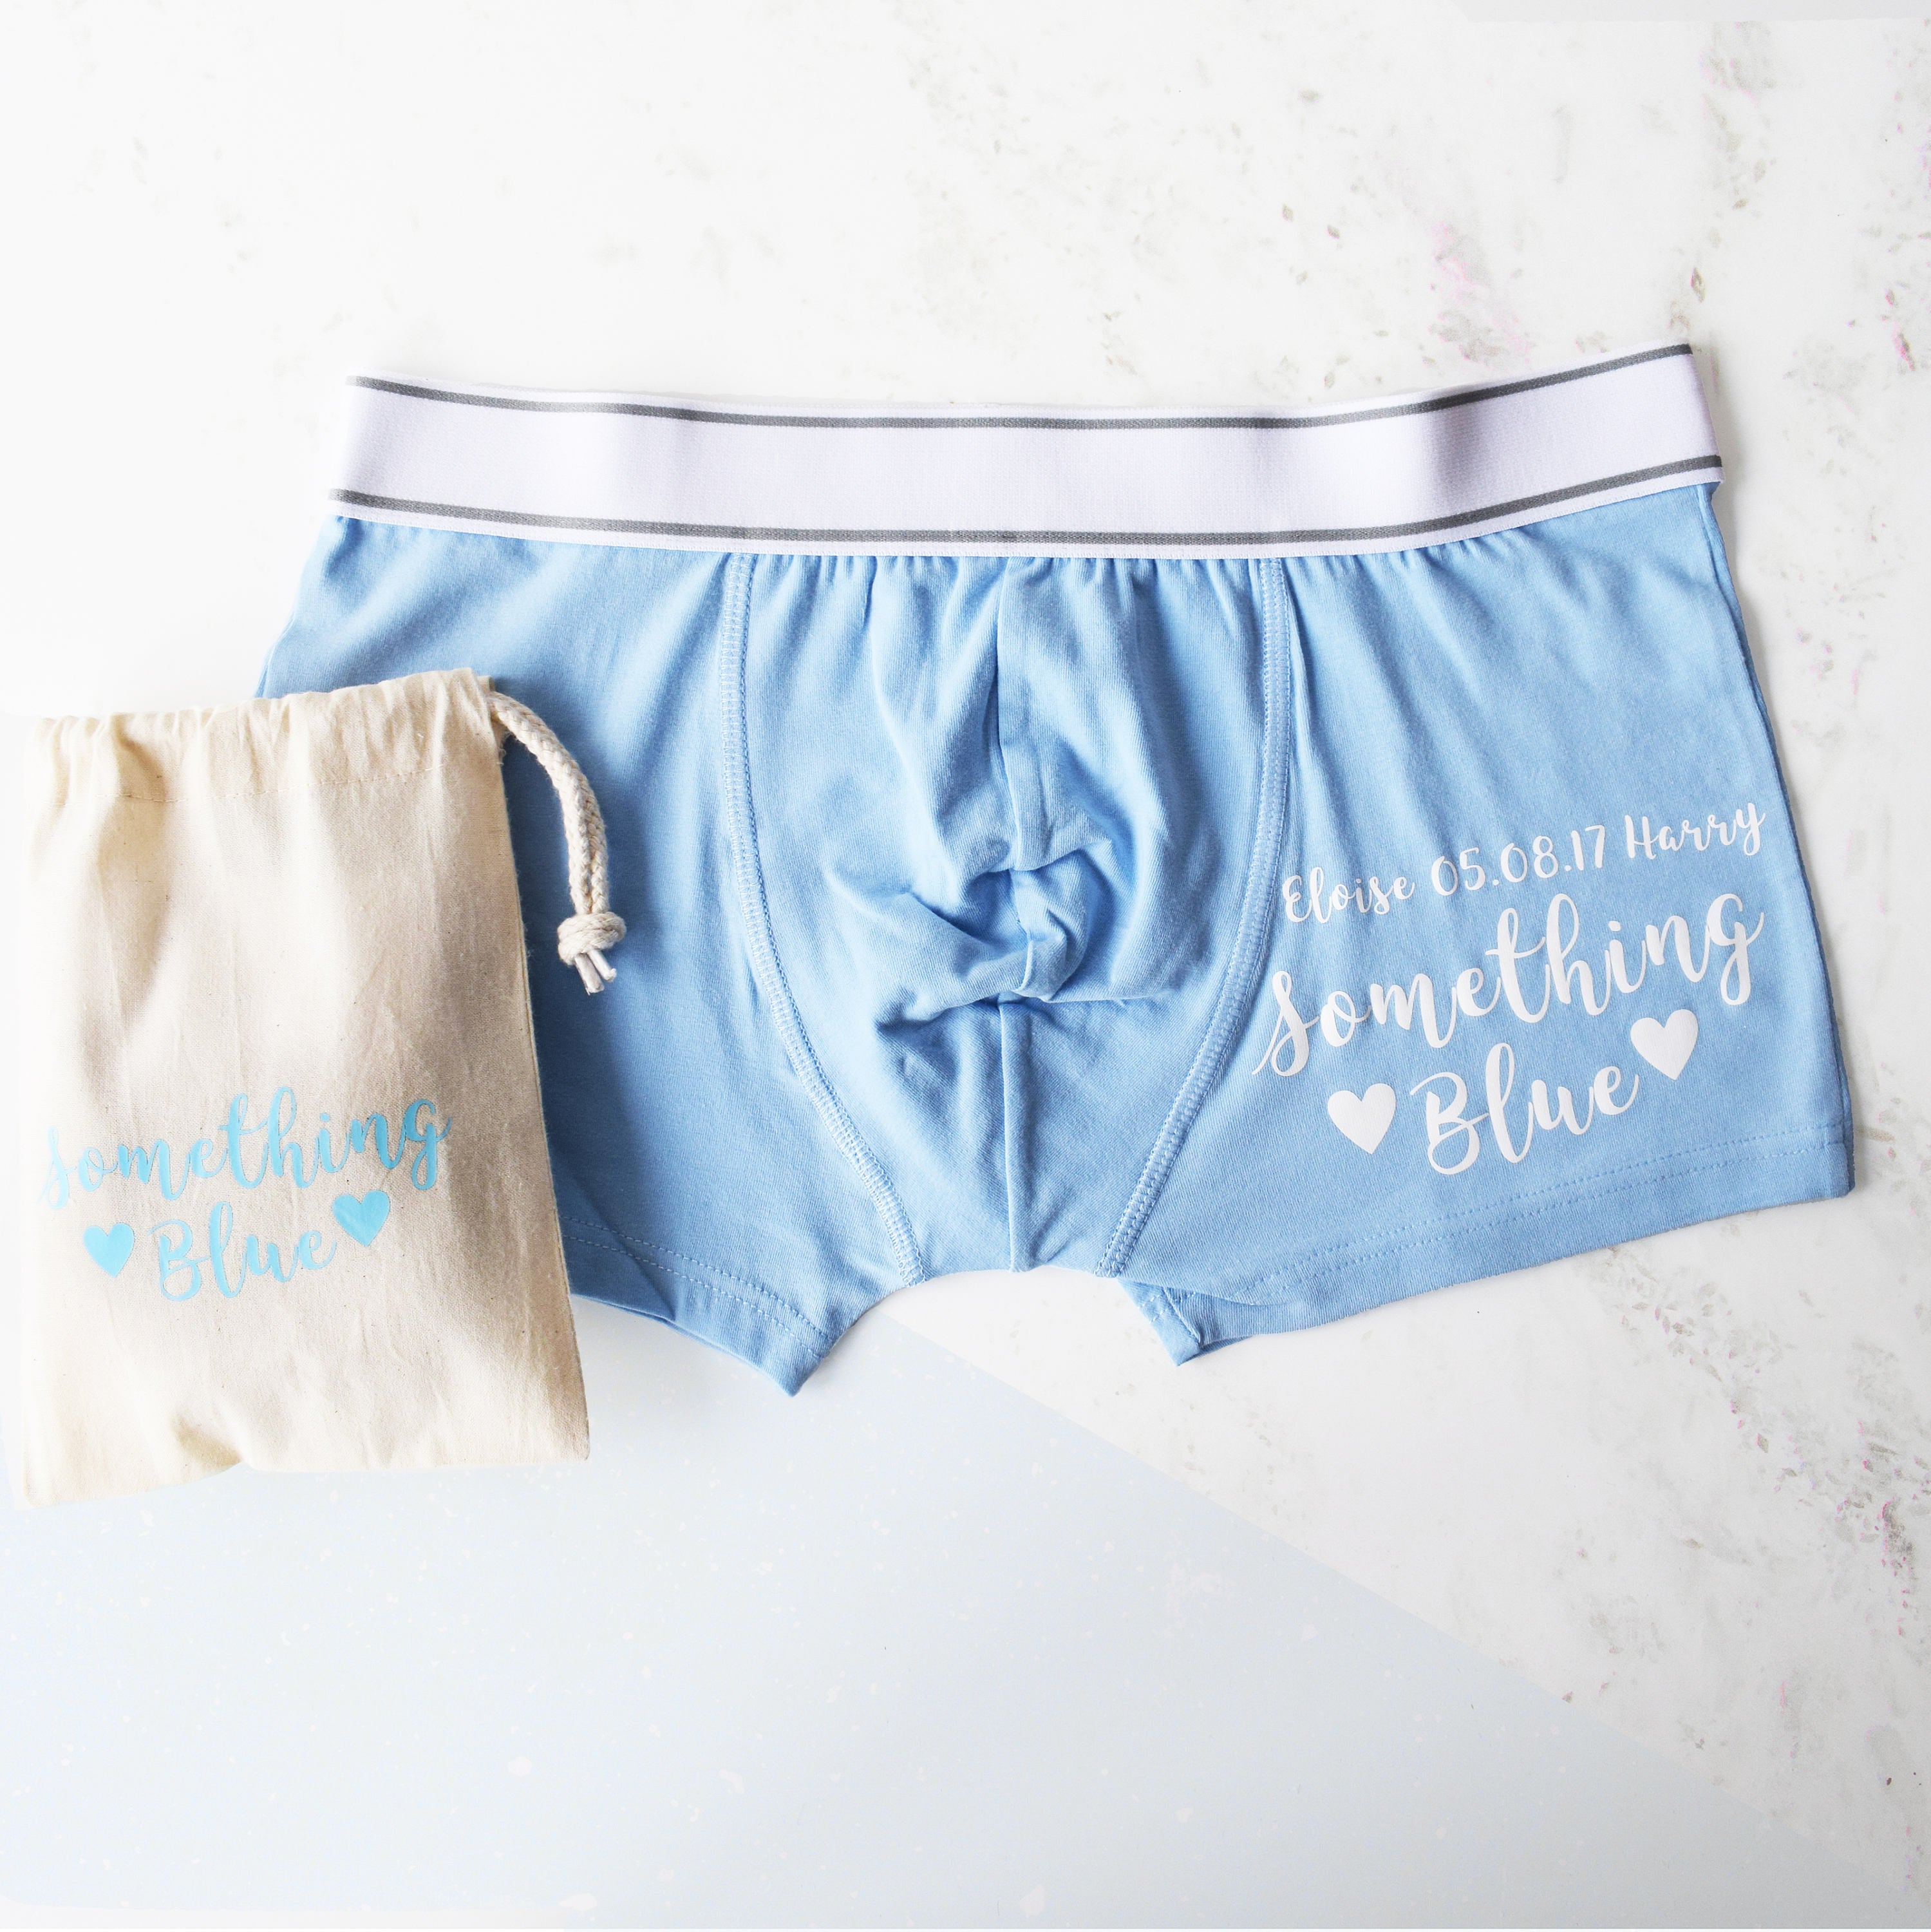 Something Blue, Boxer Briefs for the Groom